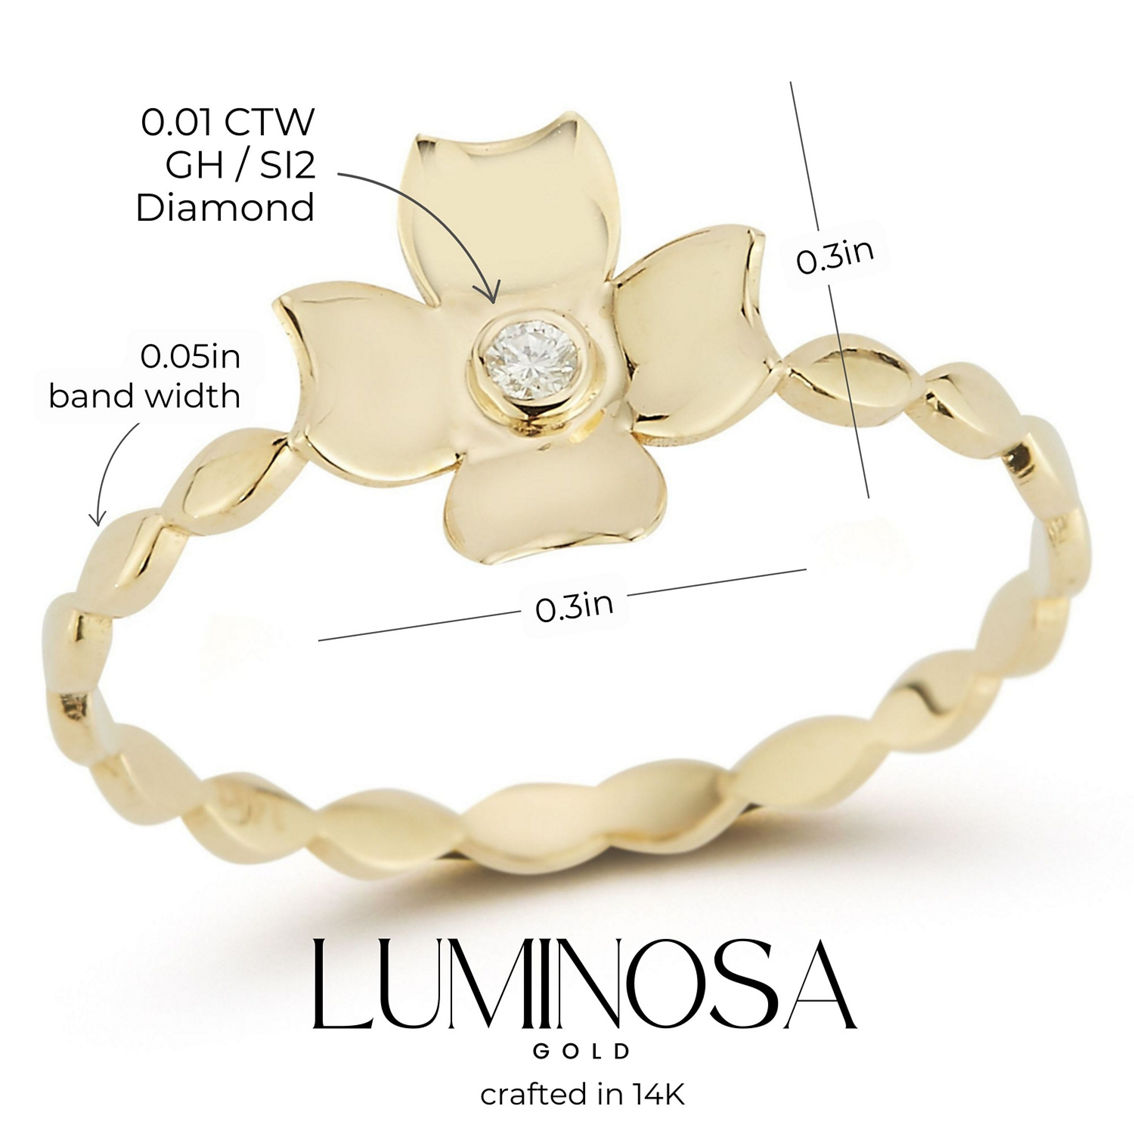 Luminosa Gold 14K Gold and Diamond Accent Flower Ring - Image 3 of 5